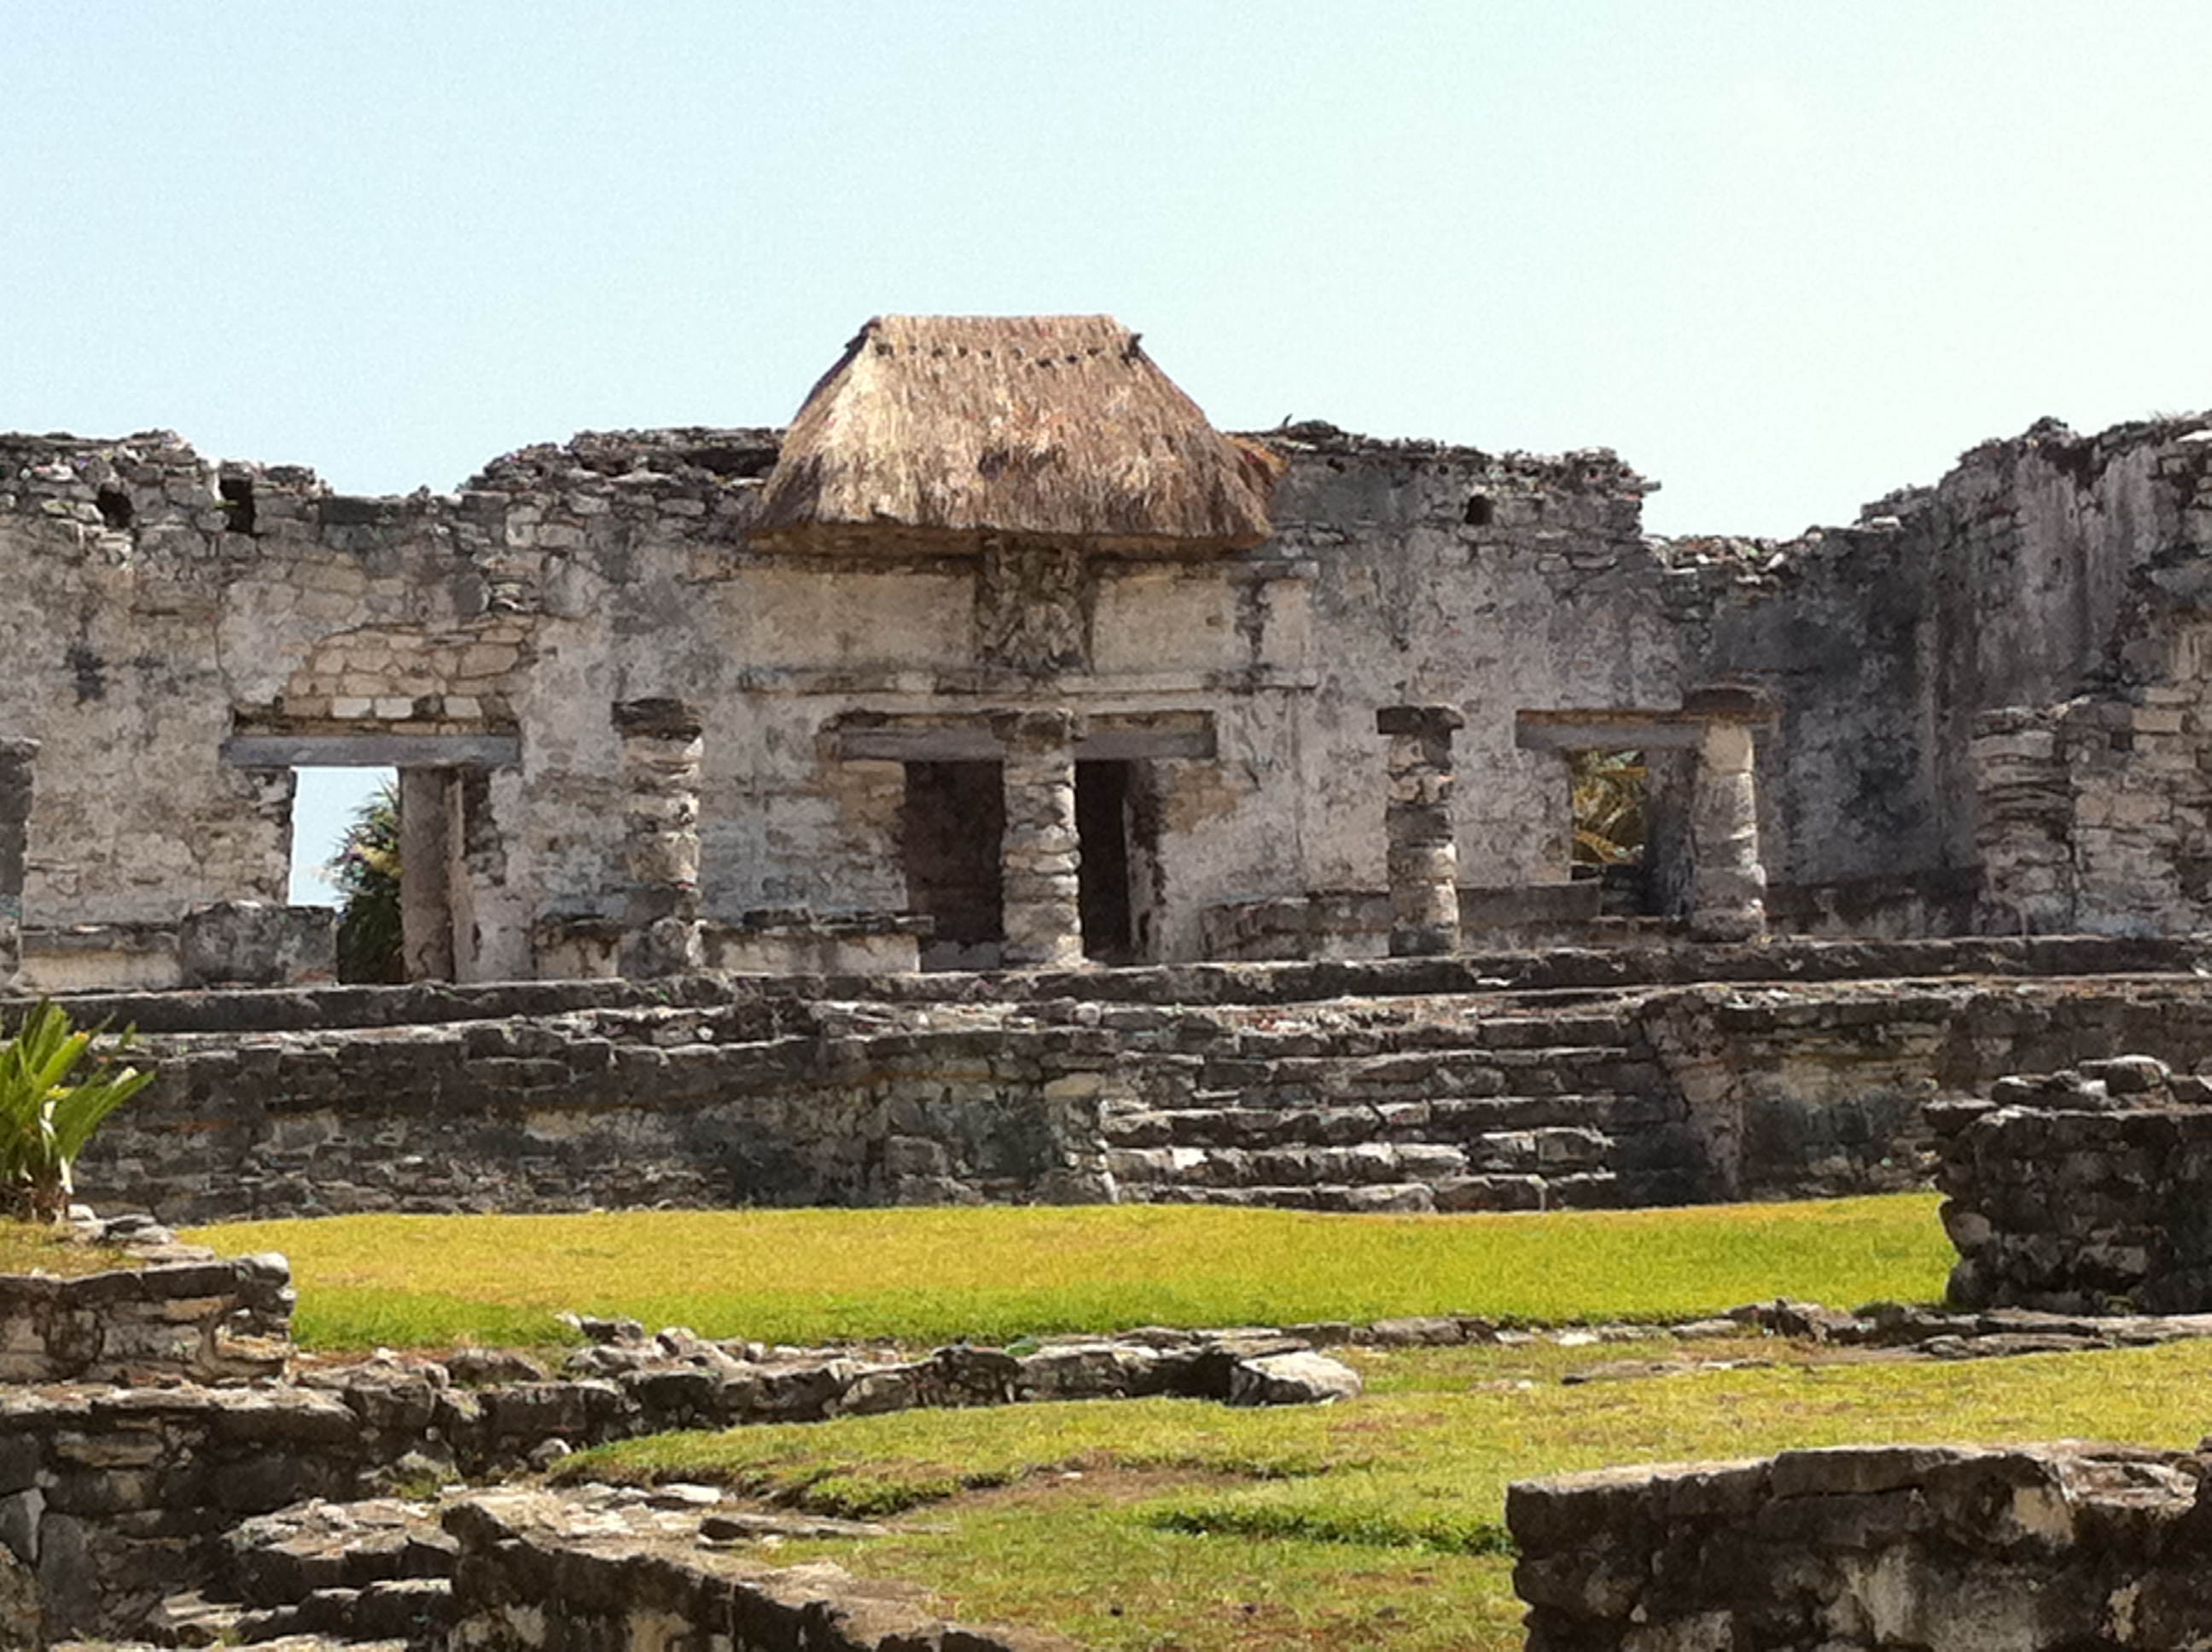 Touring the Tulum Mayan Ruins in Mexico